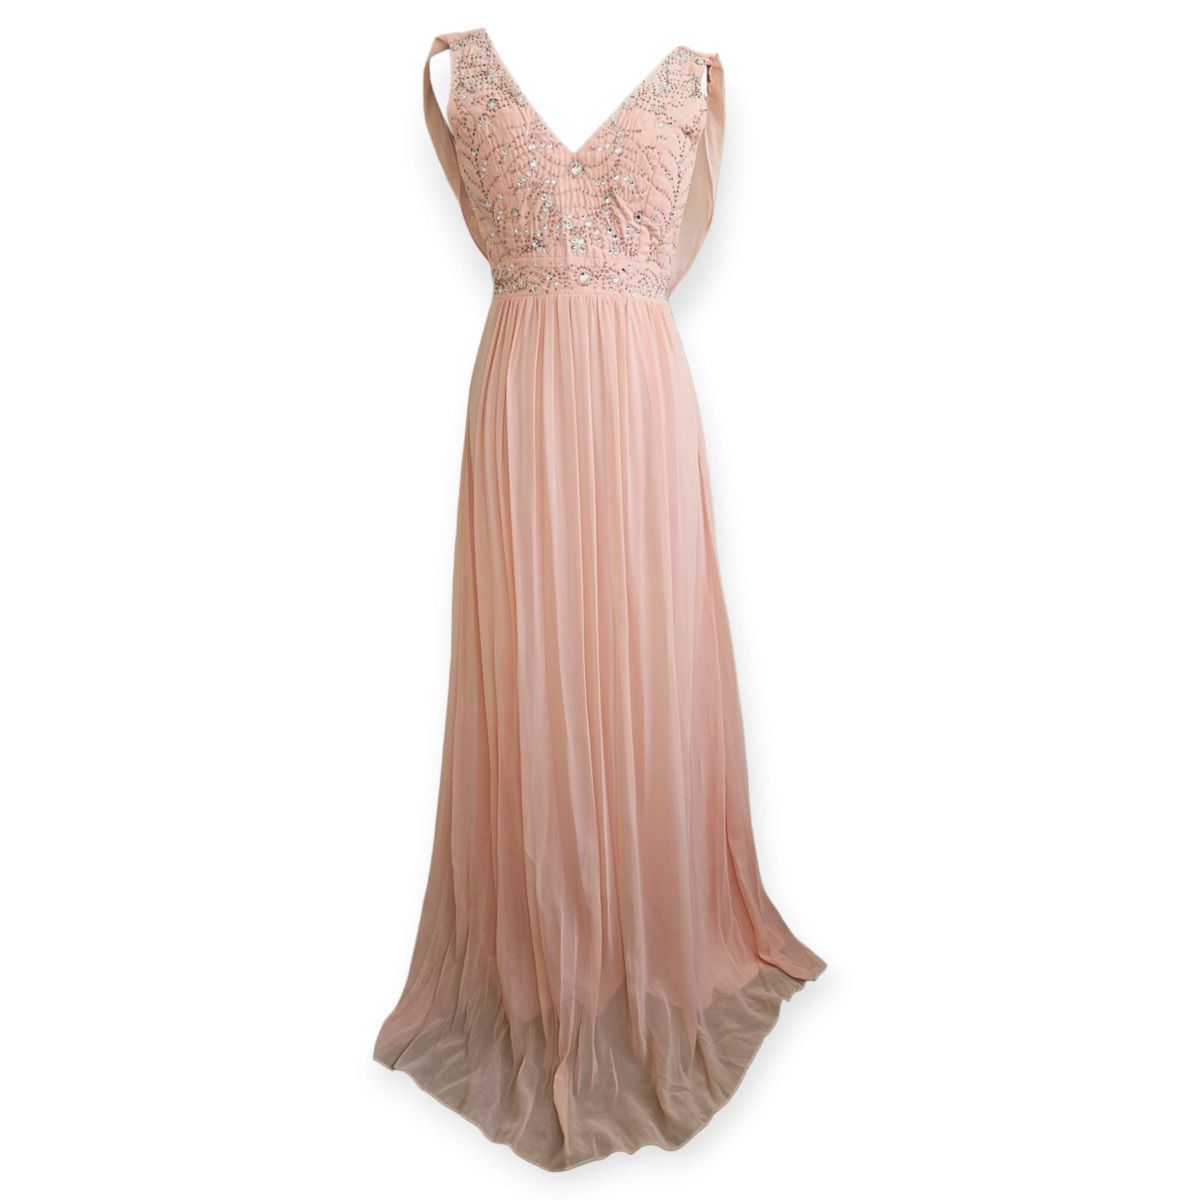 Peach Chiffon Evening Gown with Sequins | Shop Today. Get it Tomorrow ...